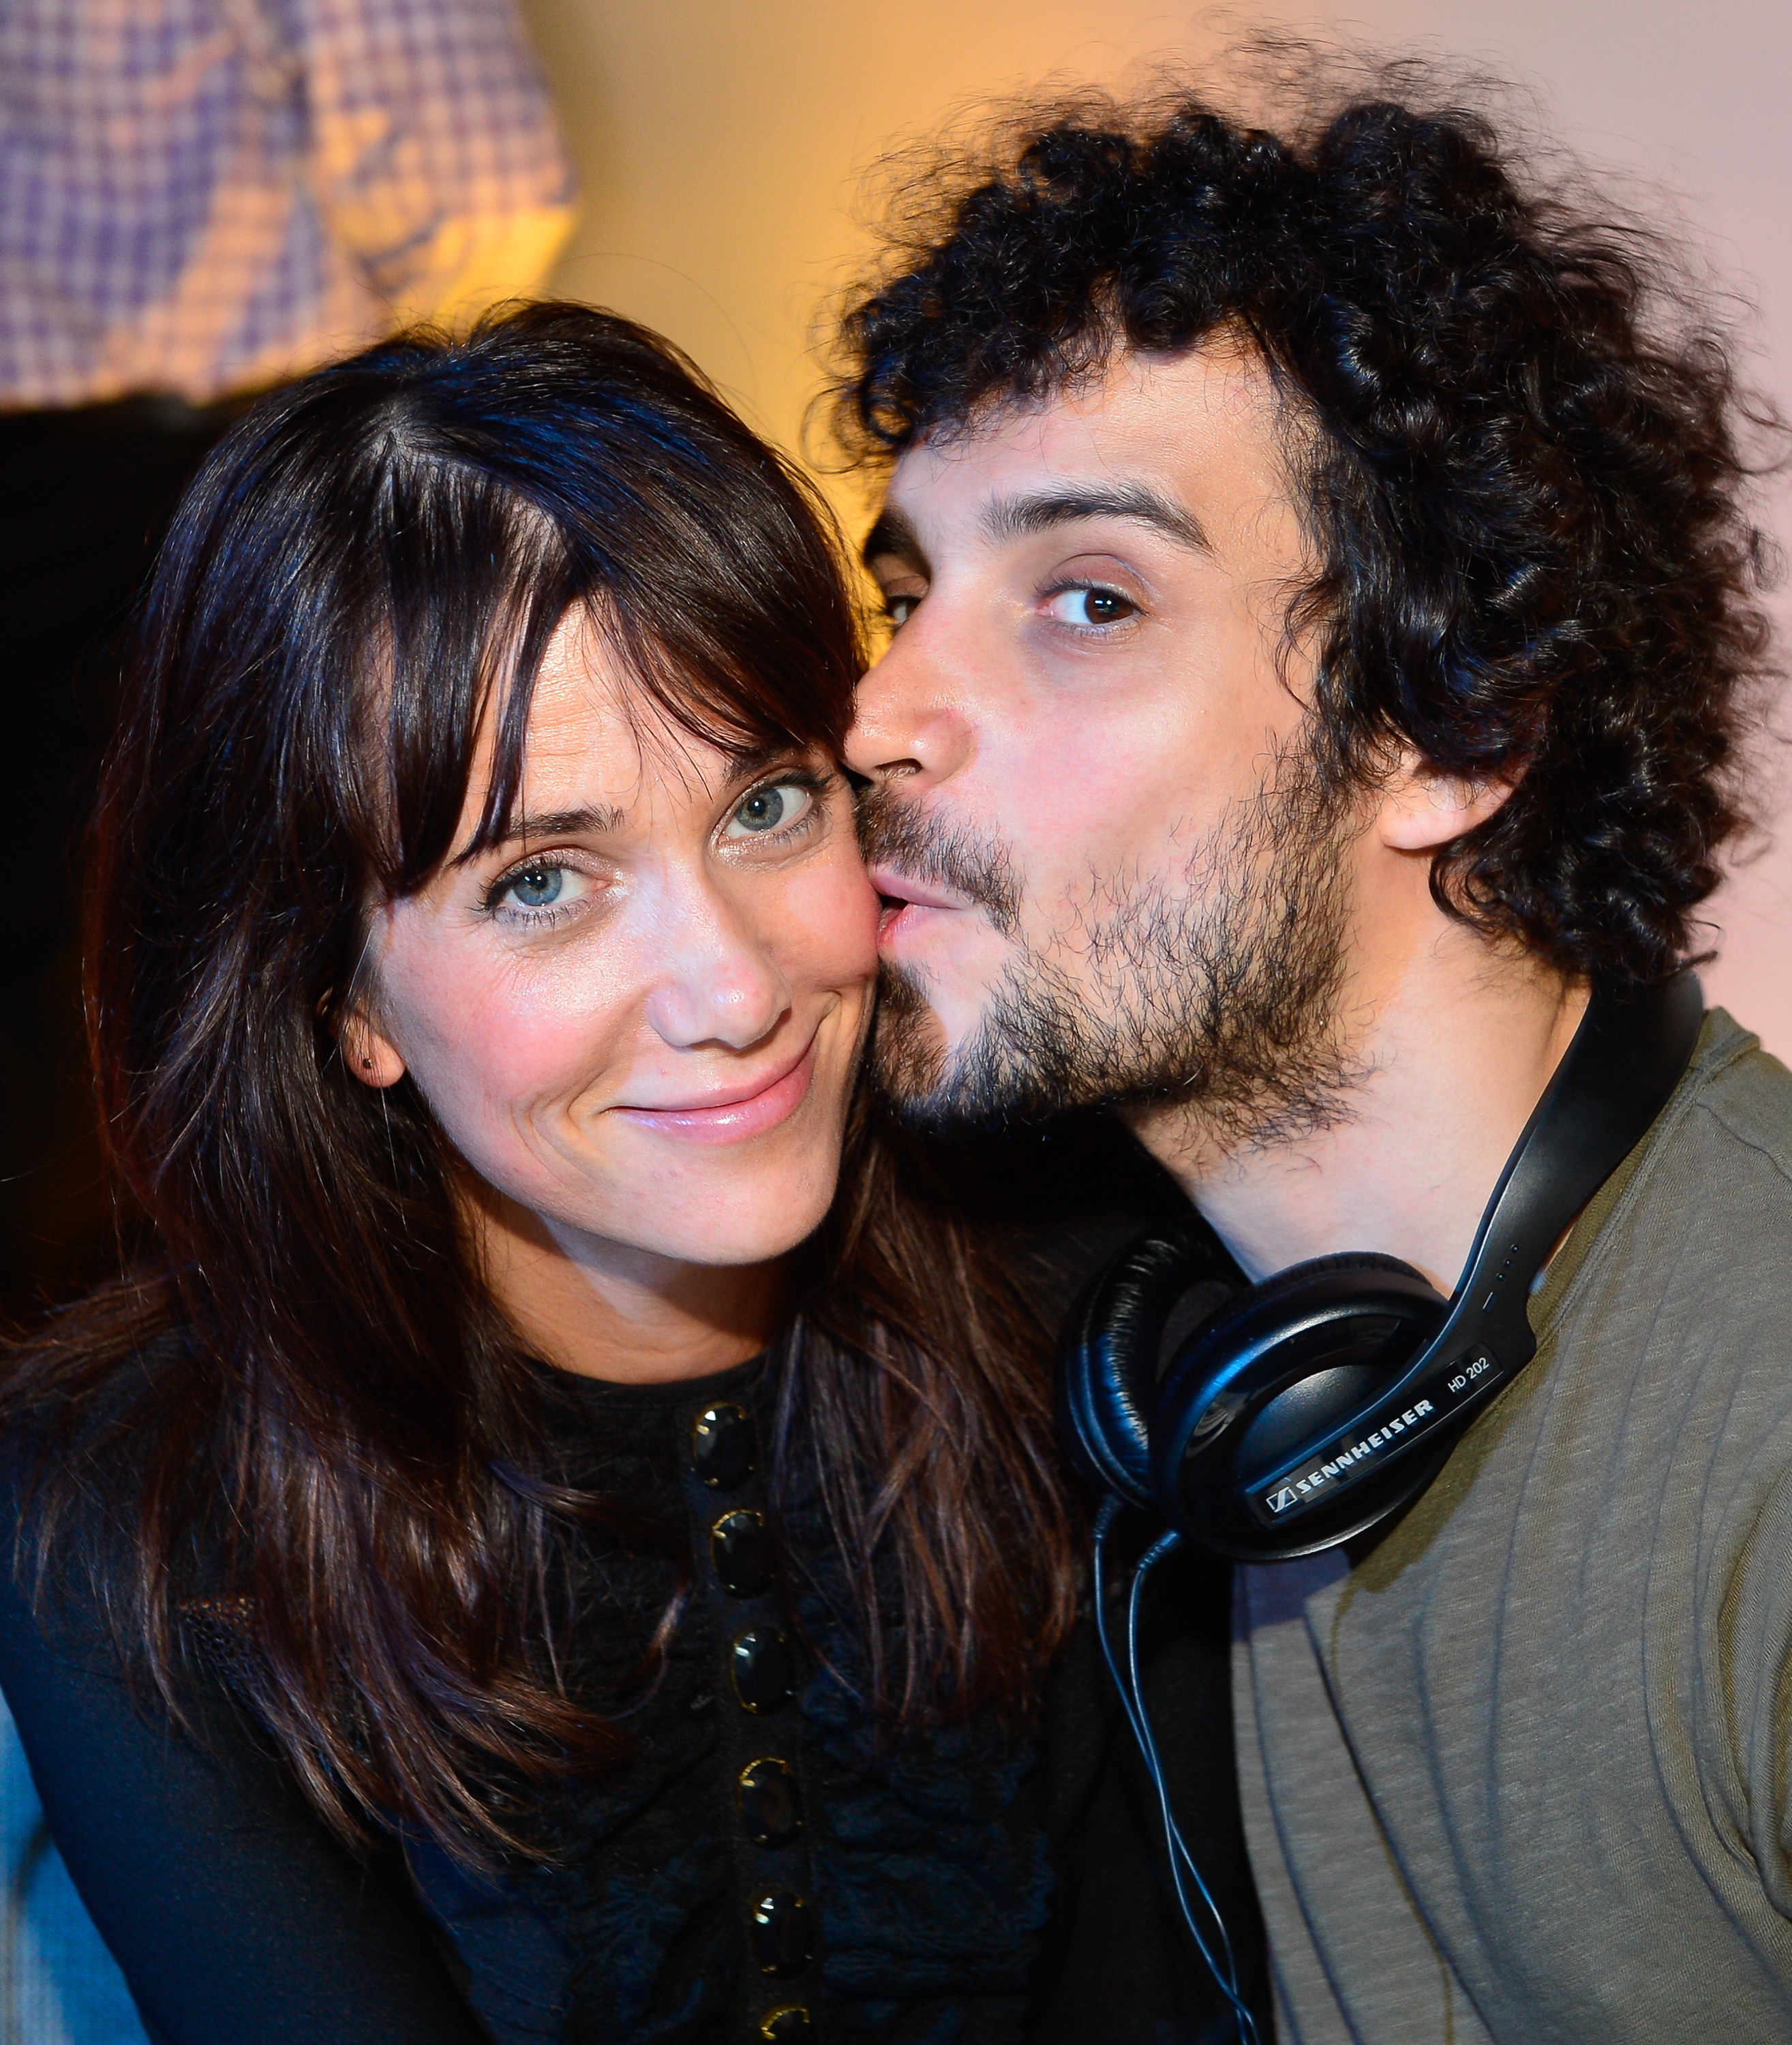 Kristen Wiig and Fabrizio Moretti (L-R) attend the Lexus &quot;Laws of Attraction&quot; at Metreon on July 30, 2012 in San Francisco, California